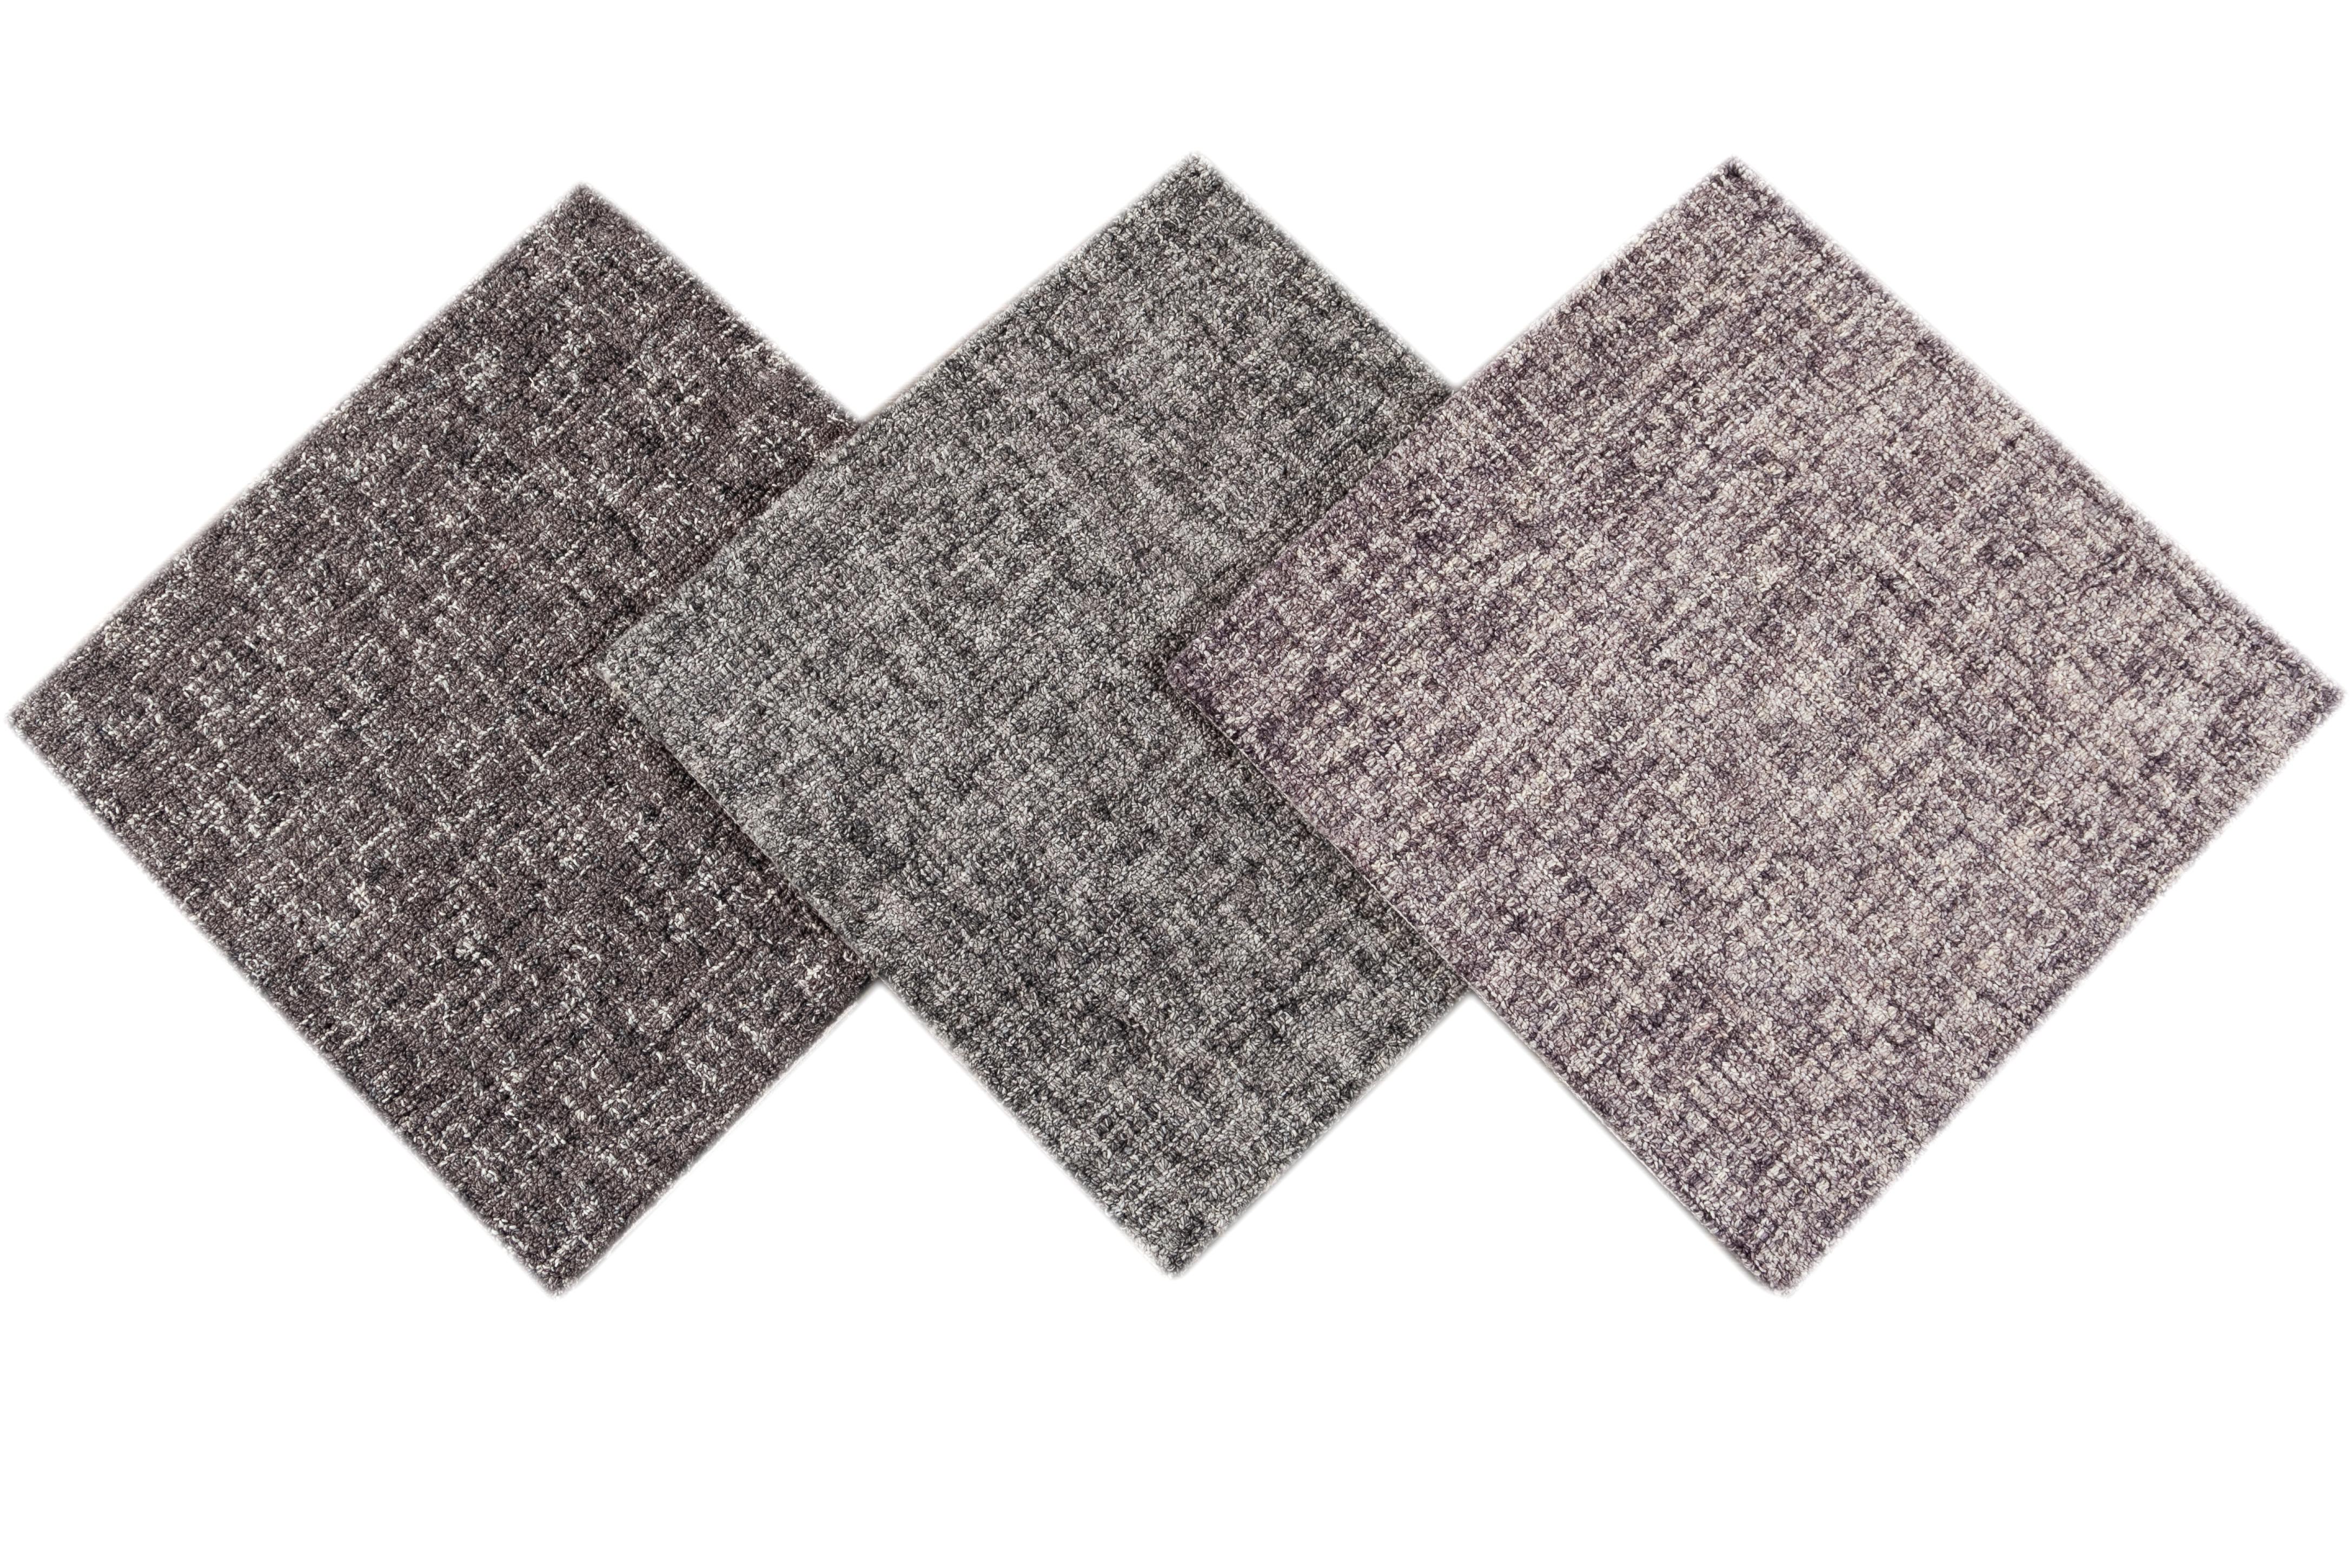 Tufted wool custom rug. Custom sizes and colors made-to-order.

Material: Tufted wool
Lead time: Approximate 12 weeks
Available colors: 20+ shades and styles
Made in India.

(Note: Pricing listed is for an 8'x10' rug.).
 